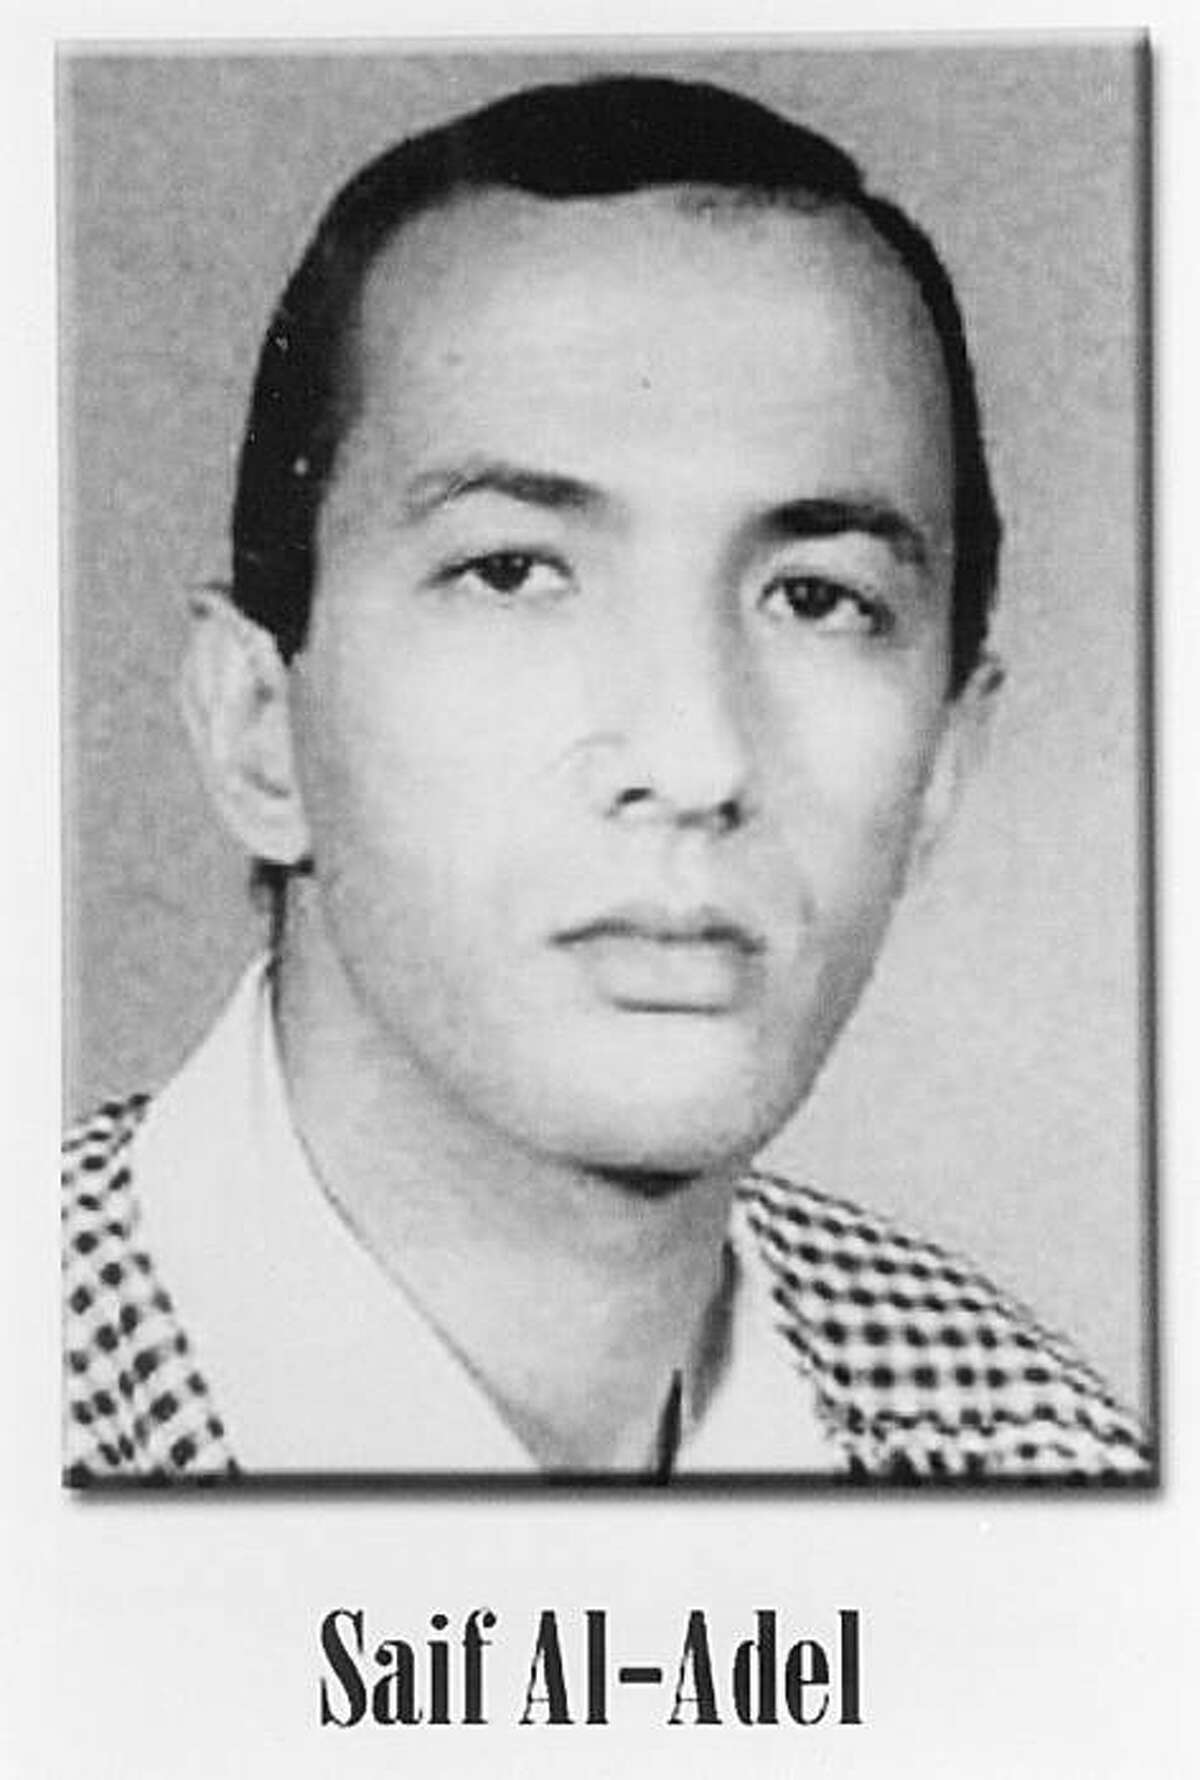 In this image released by the FBI, Saif al-Adel is one of the FBI's most wanted terrorists. He is believed to be living in Iran with other senior al-Qaida leaders. Lately, US intelligence officials have seen a trickle of lower-level terror operatives leaving Iran, raising concerns that Iran is easing its grip on al-Qaida. Intelligence reports have circulated that al-Adel was traveling out of Iran, though a senior counterterrorism official says there's no clear evidence of that.